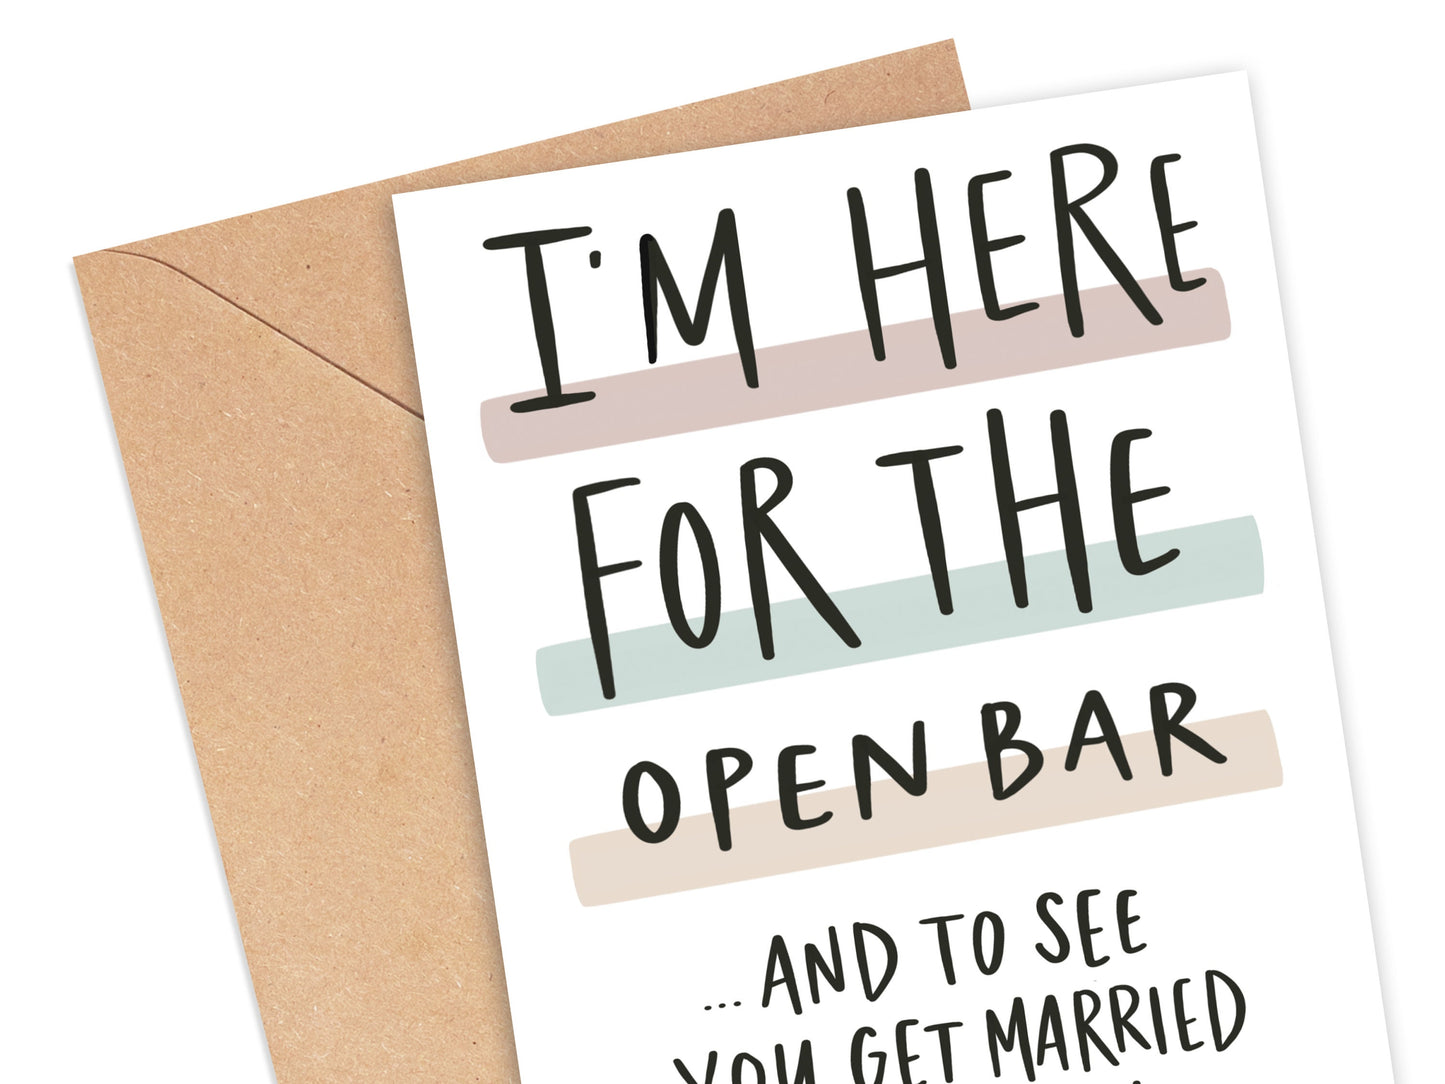 I'm Here For the Open Bar and to See You Get Married of Course Card Simply Happy Cards